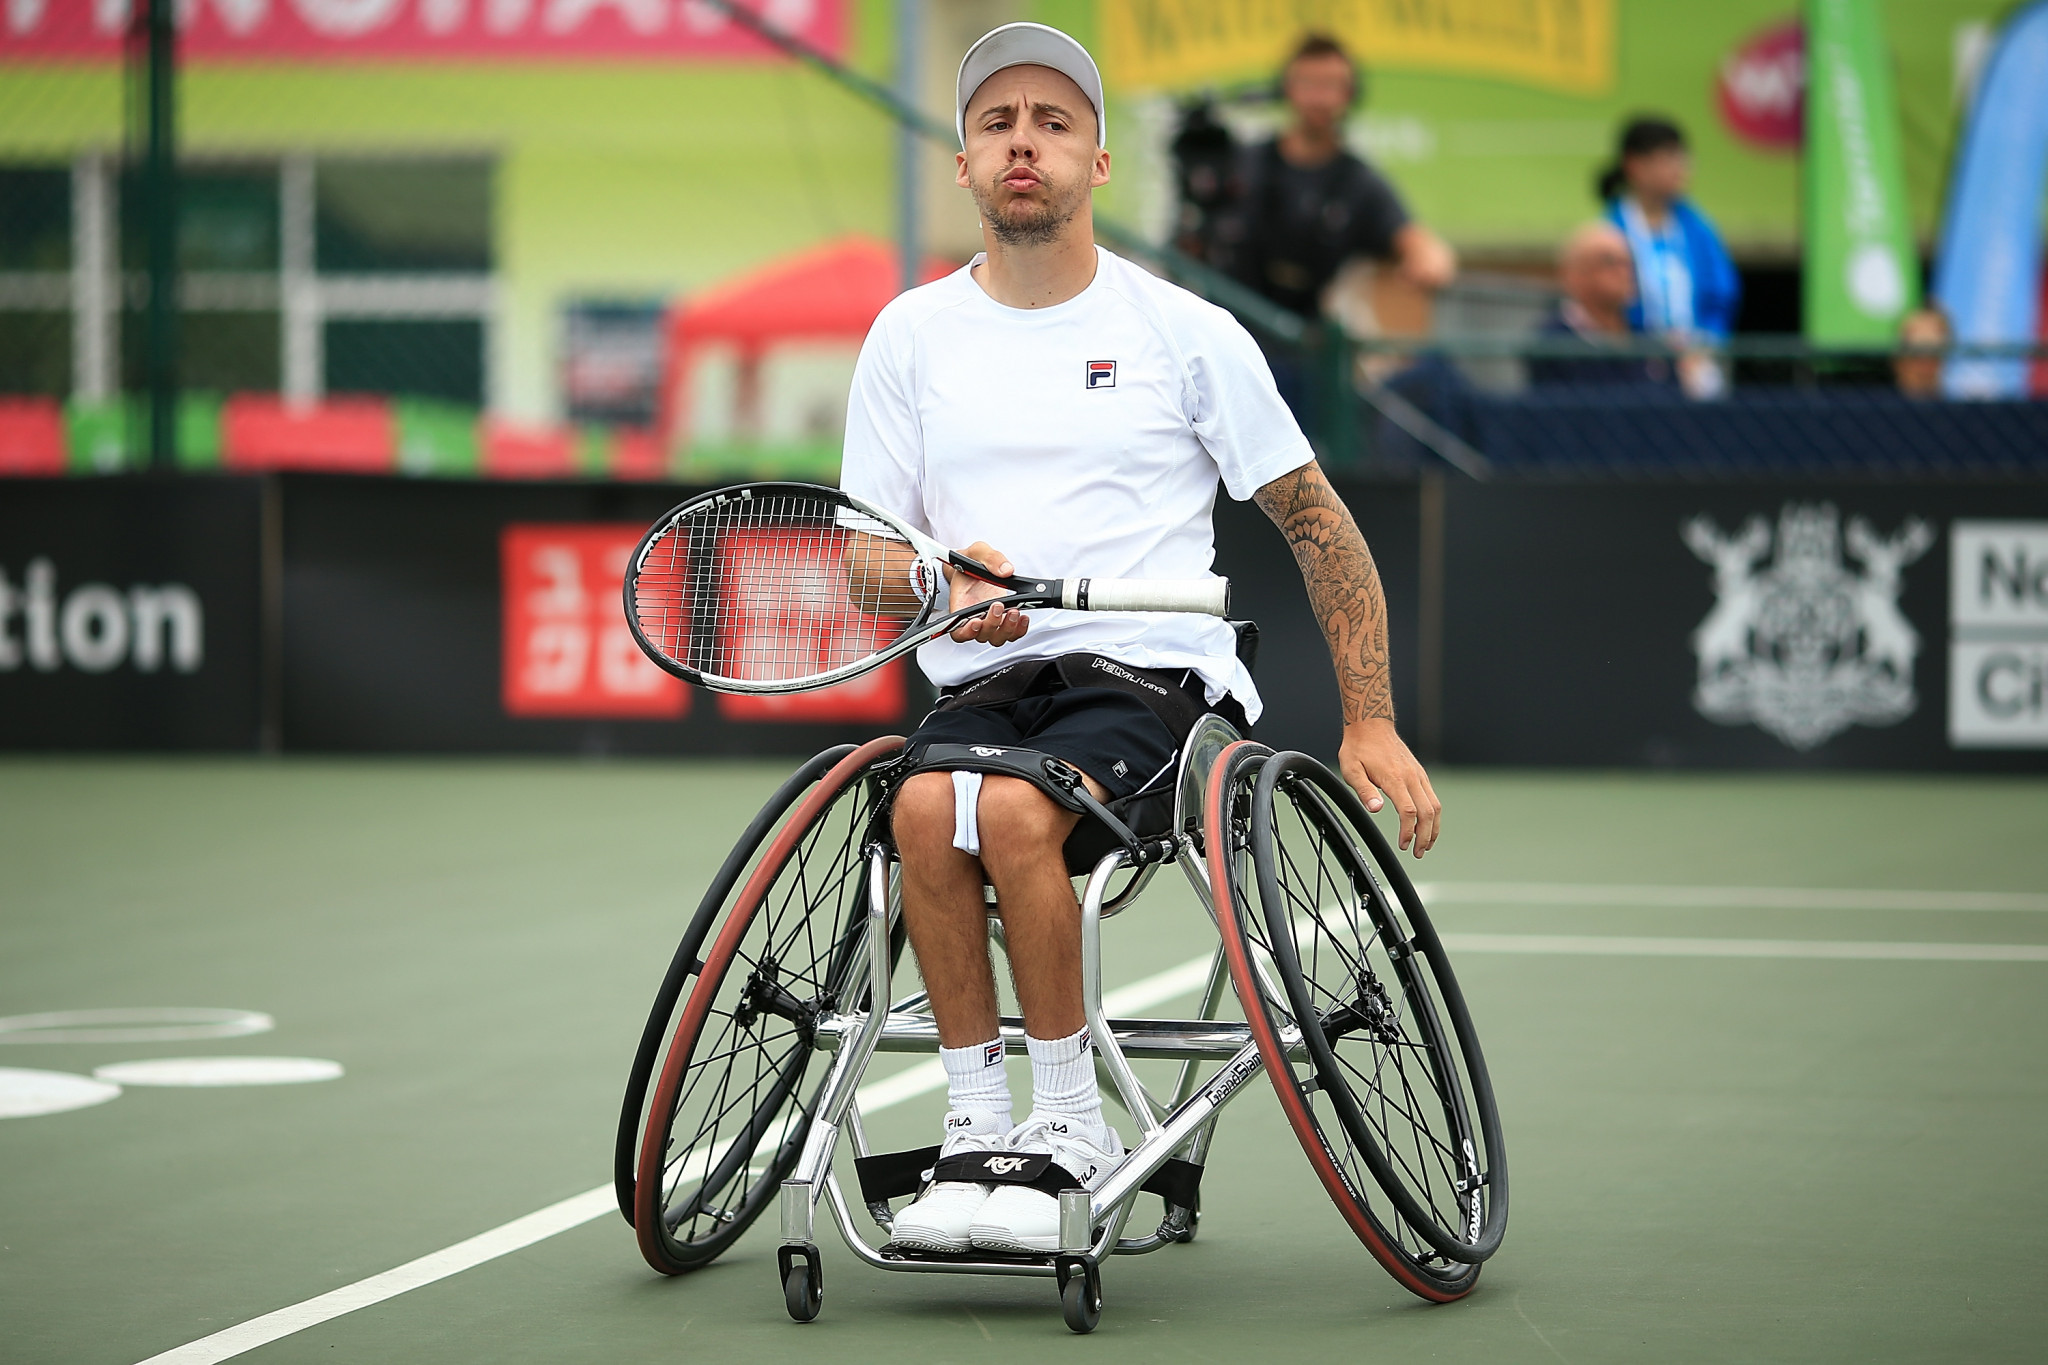 Rematch confirmed in quad doubles final at Wheelchair Doubles Masters